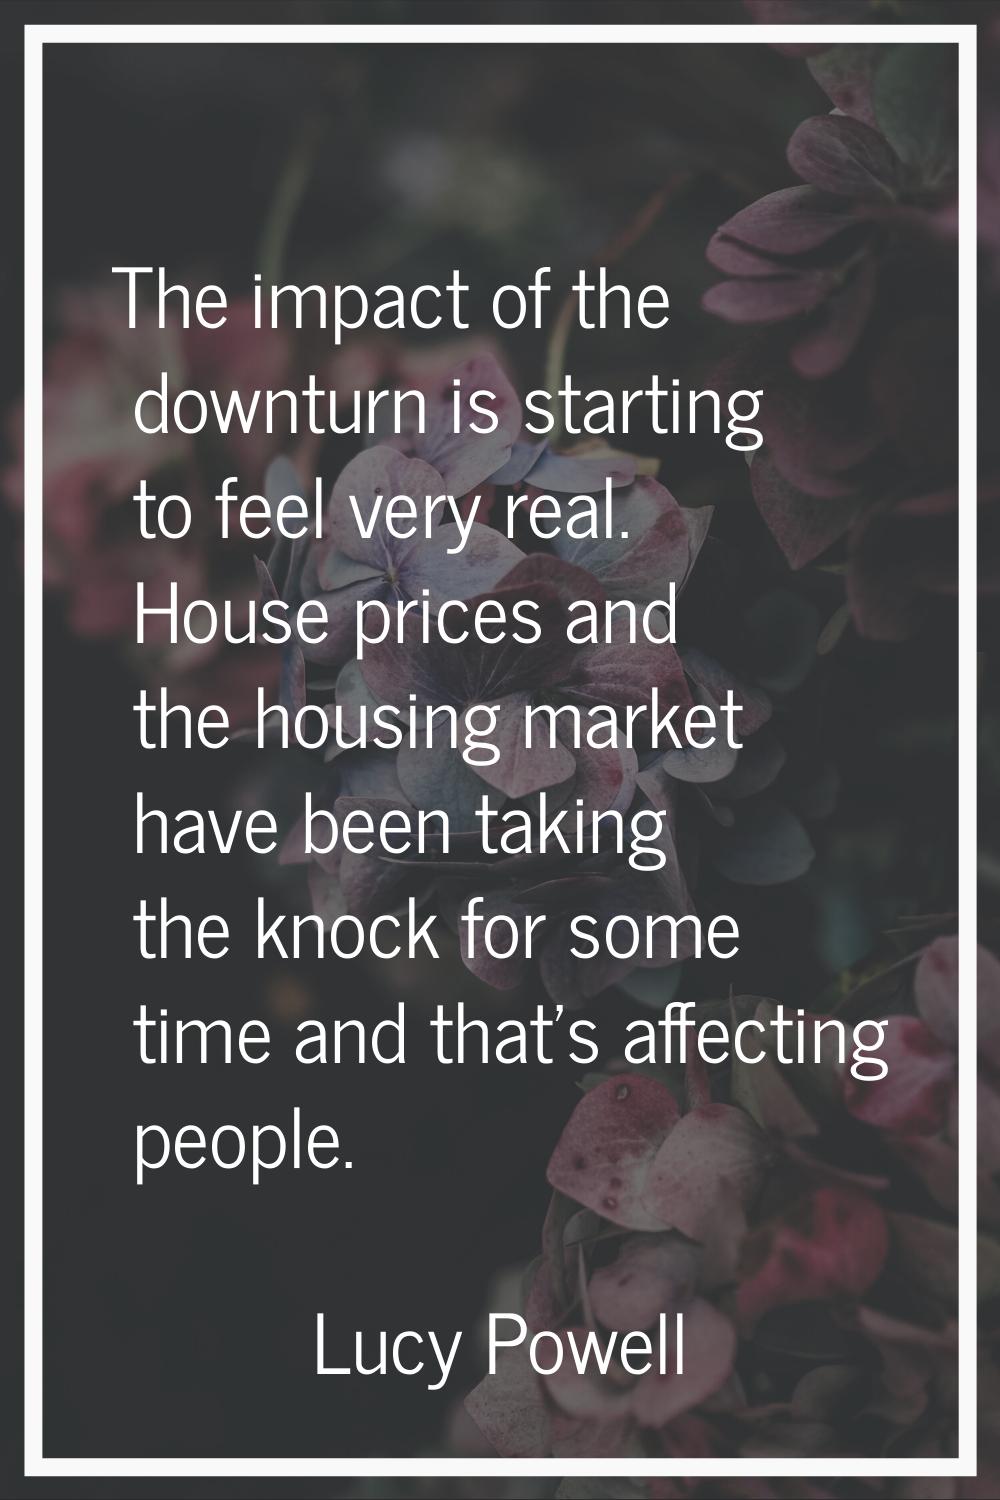 The impact of the downturn is starting to feel very real. House prices and the housing market have 